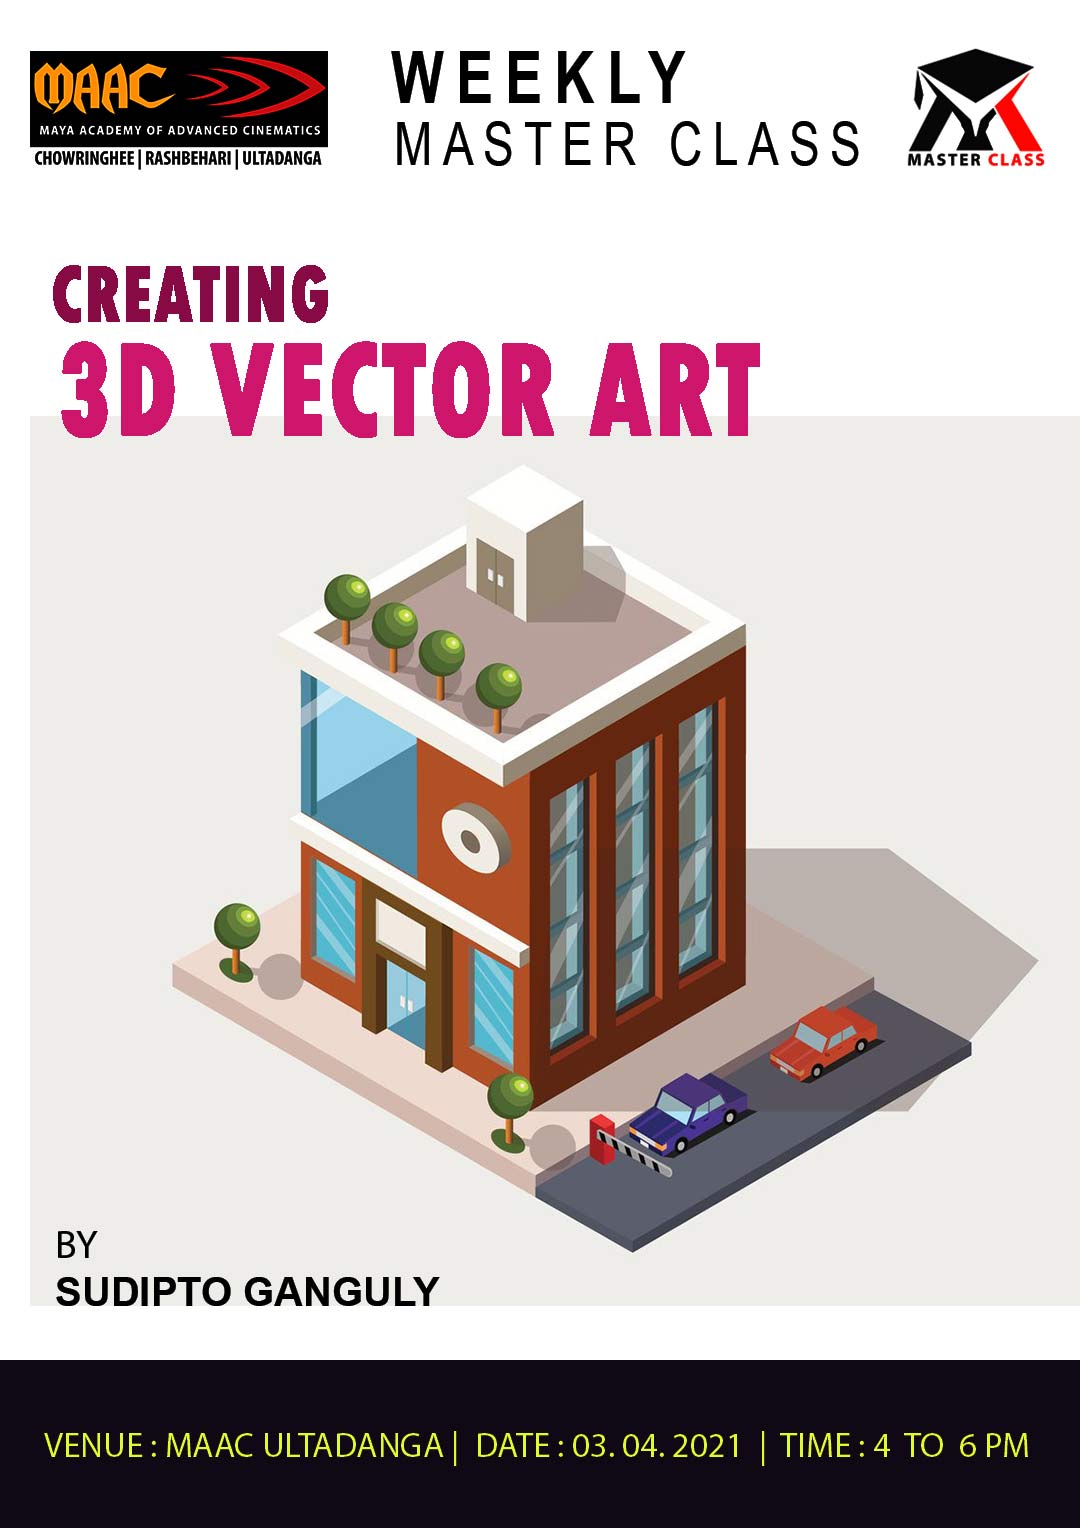 Weekly Master Class on 3D Vector Art